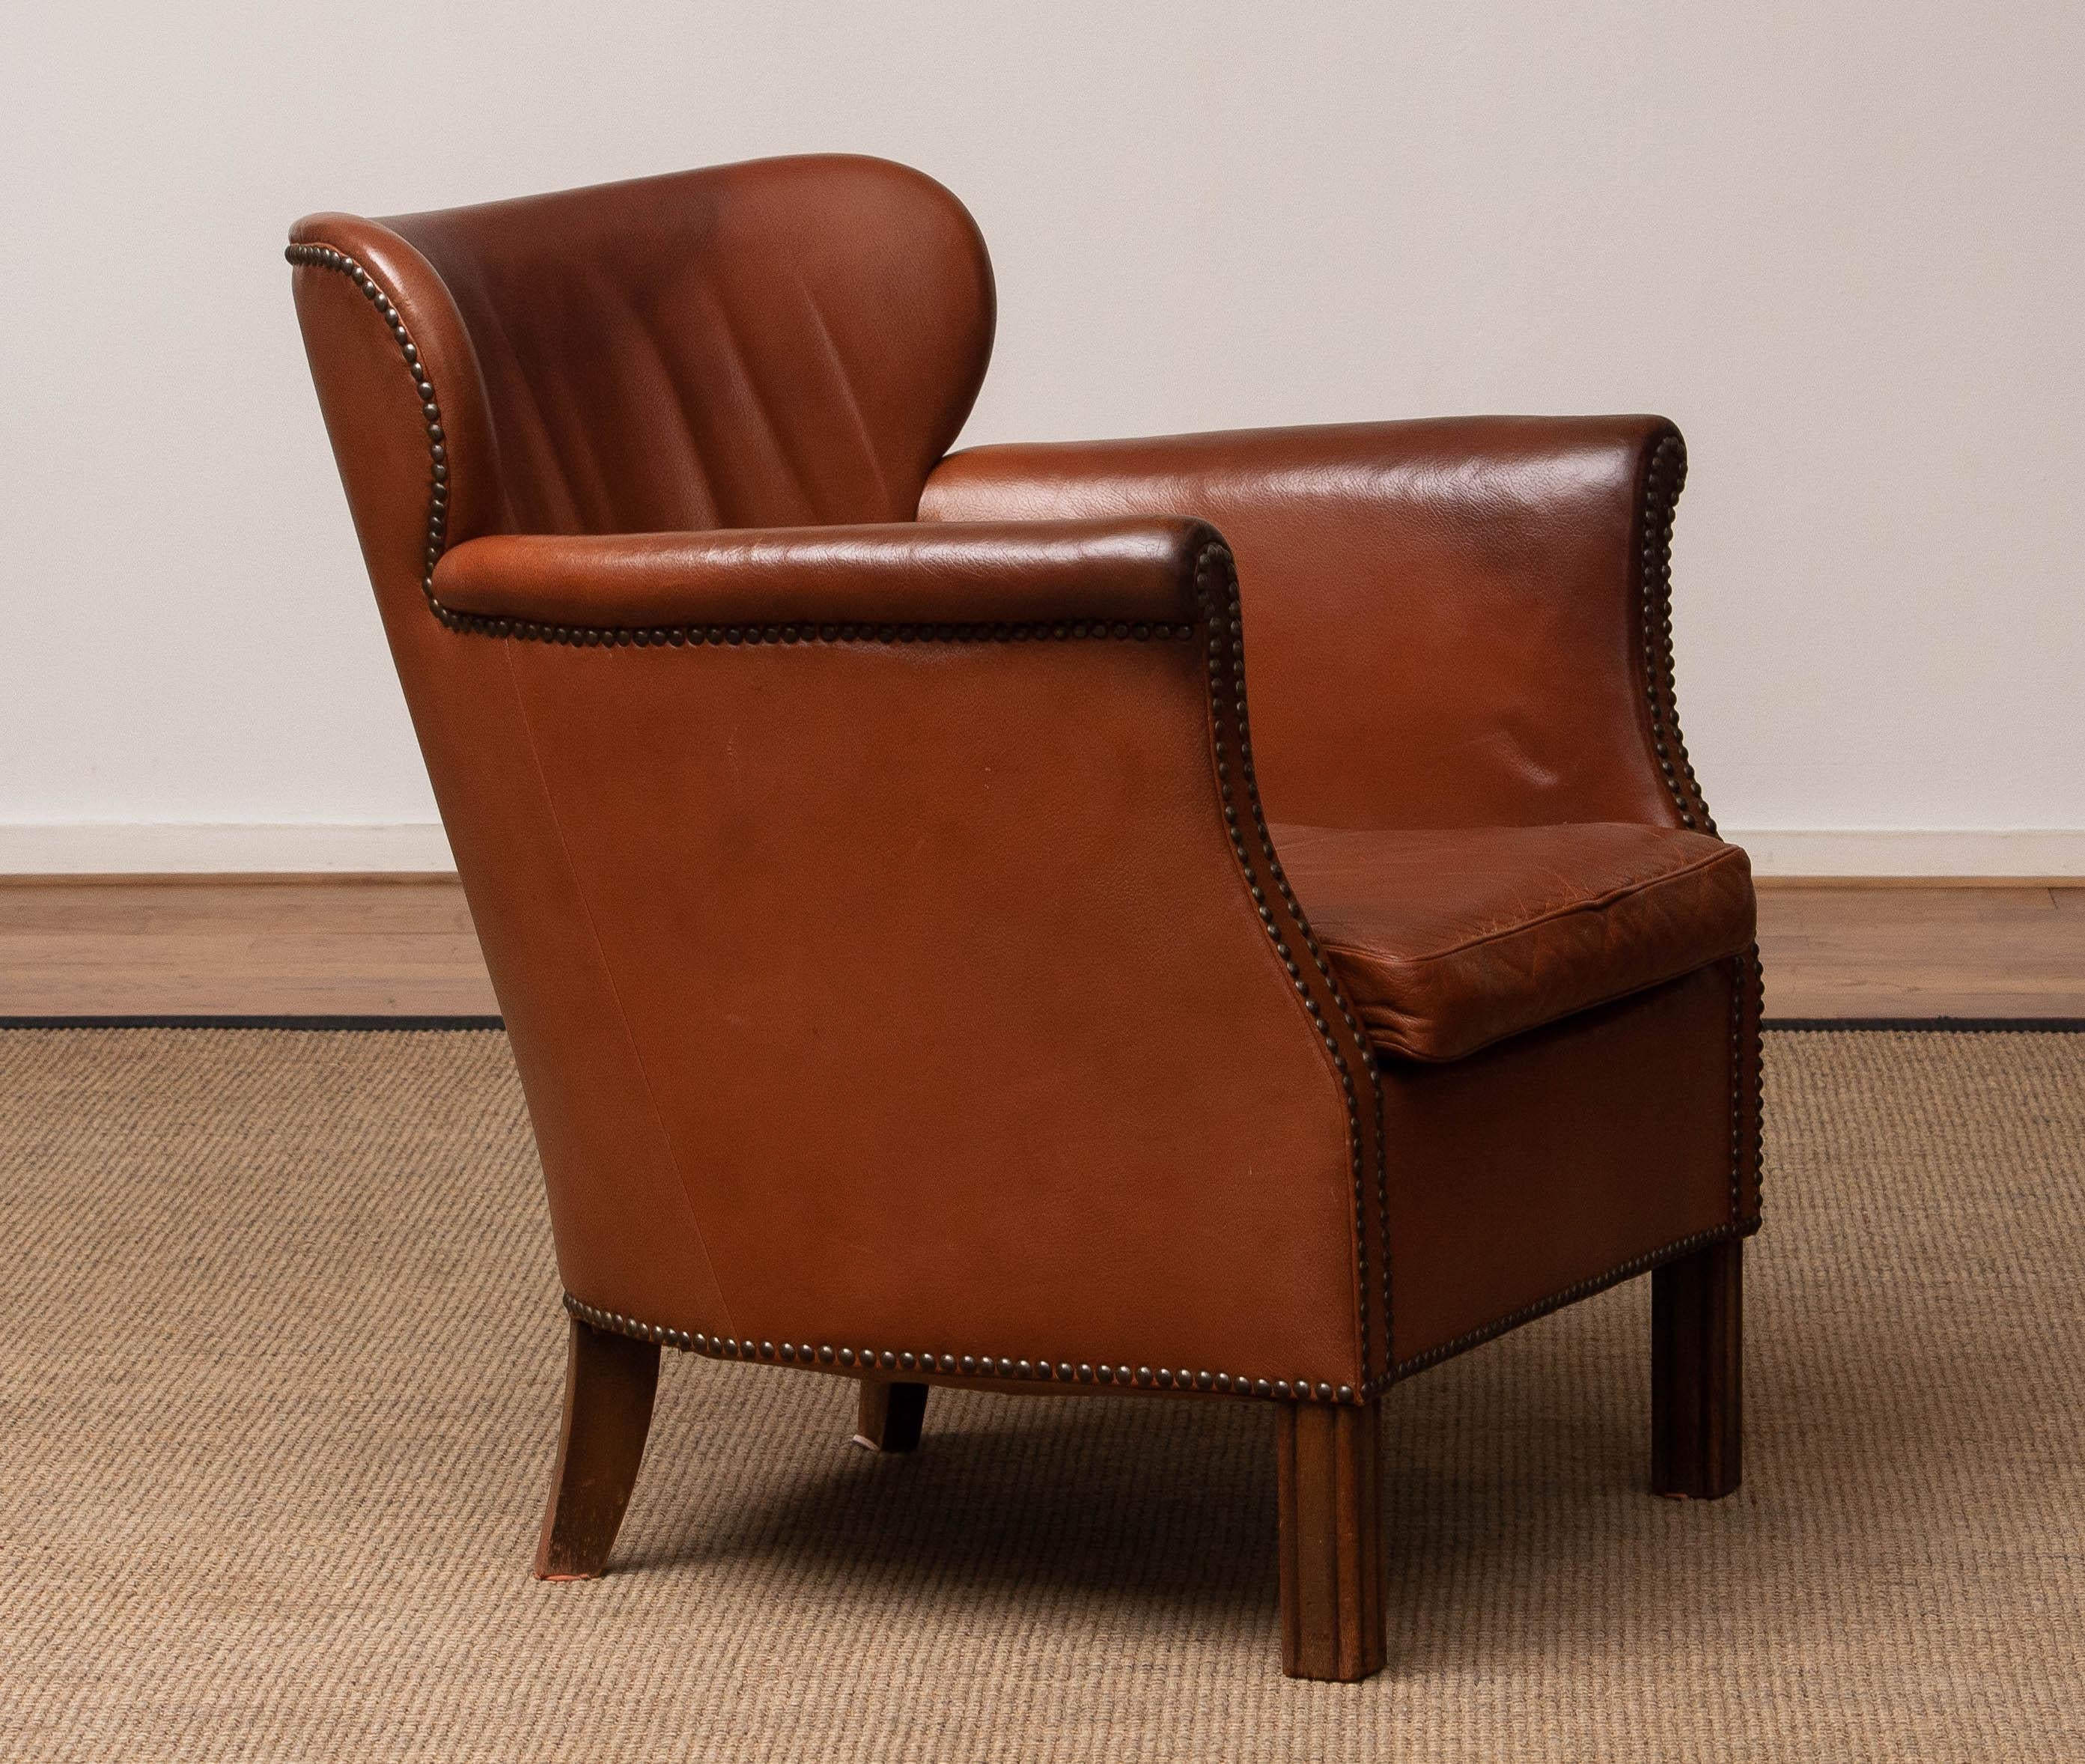 Scandinavian lounge chair from the first half of the 20th century in tan / brown nailed leather made in Denmark in allover good condition. Please note that there is made a repair inside the backrest in the past. (visible on the photo) what doen't